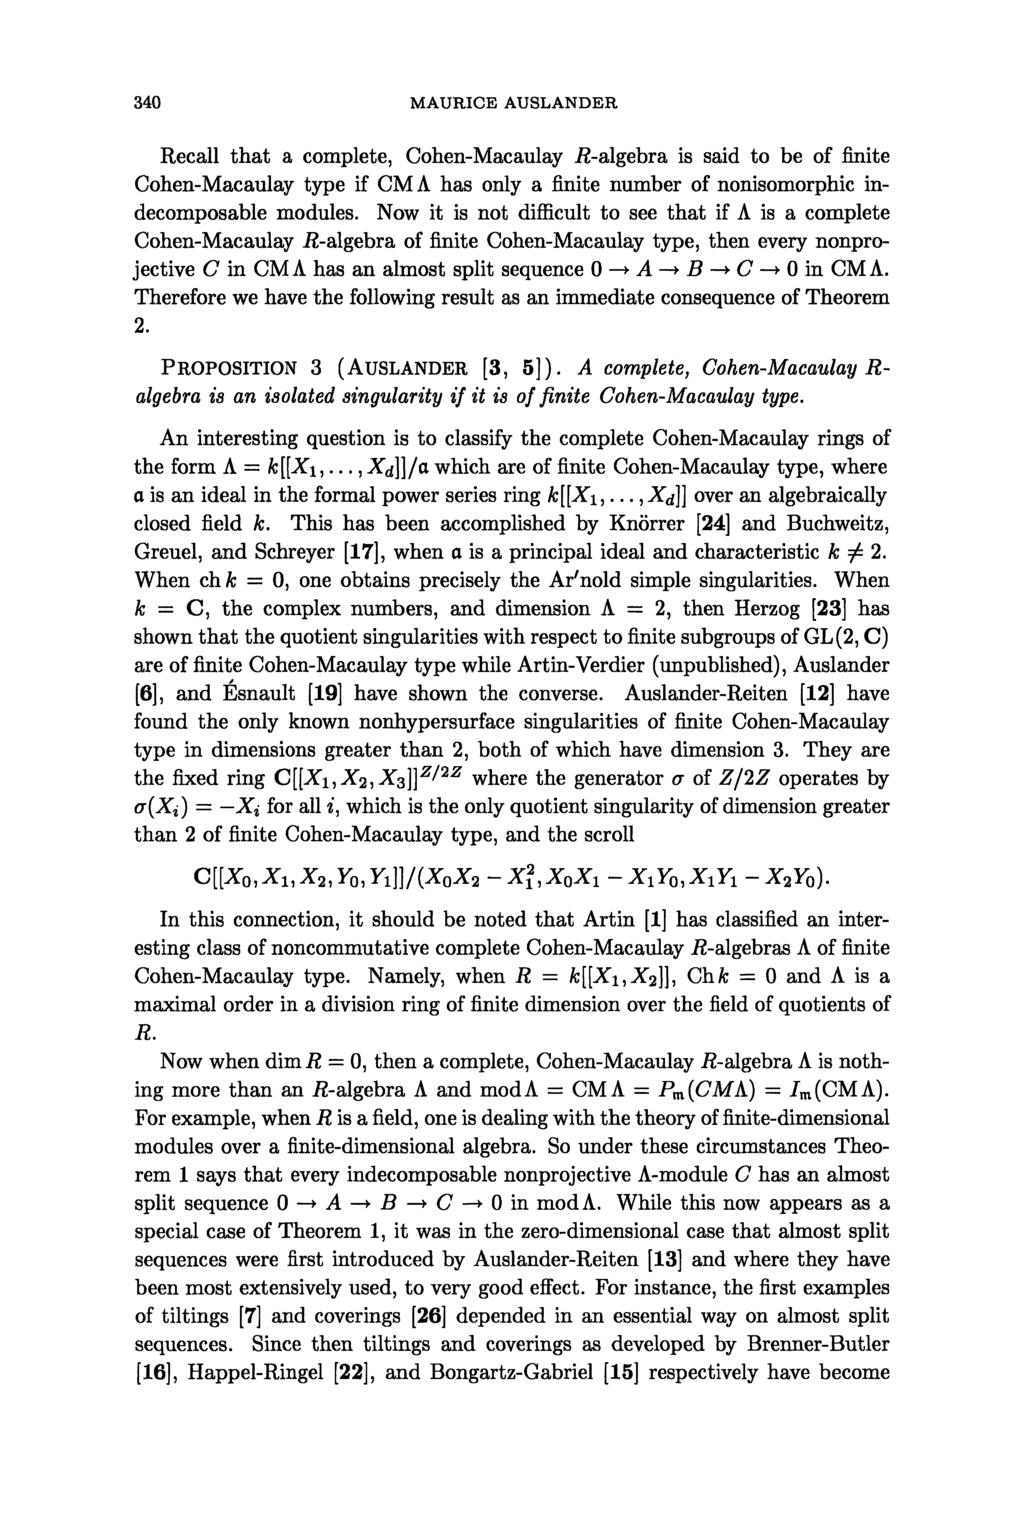 340 MAURICE AUSLANDER Recall that a complete, Cohen-Macaulay P-algebra is said to be of finite Cohen-Macaulay type if CM A has only a finite number of nonisomorphic indecomposable modules.